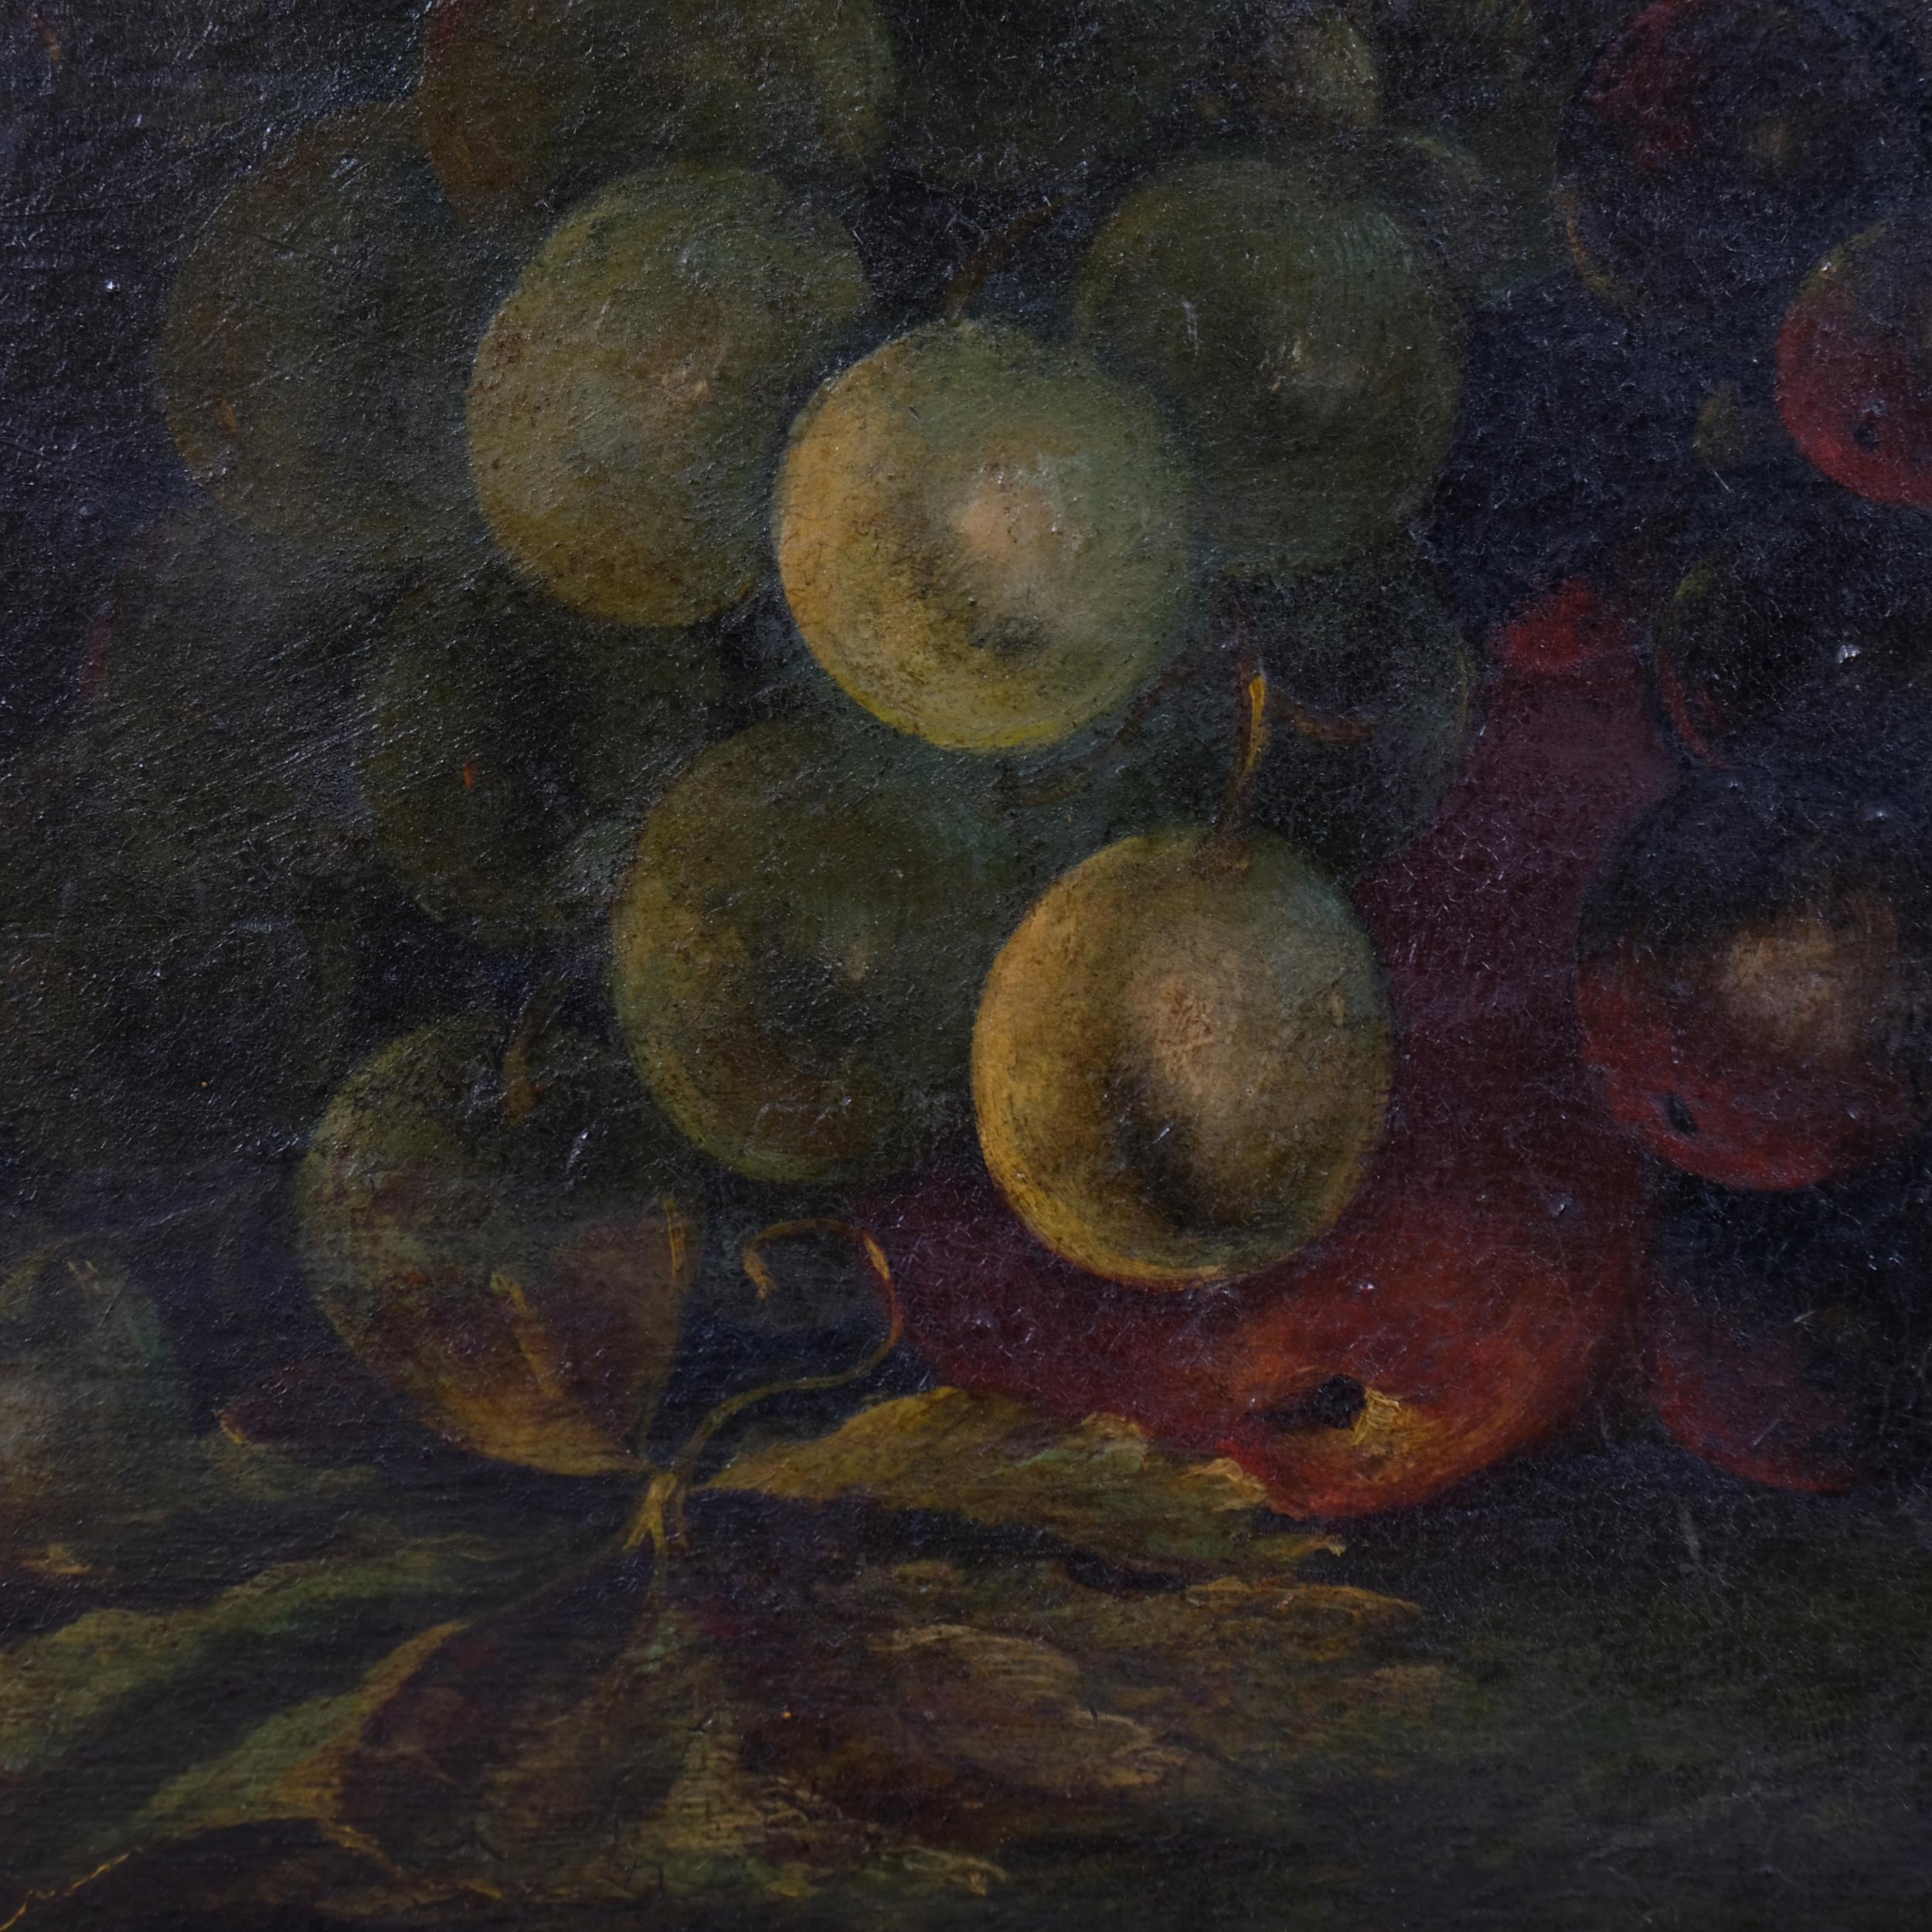 Bird with grapes on a mossy bank, 19th century oil on wood panel, unsigned, 30cm x 34cm, framed Good - Image 3 of 4